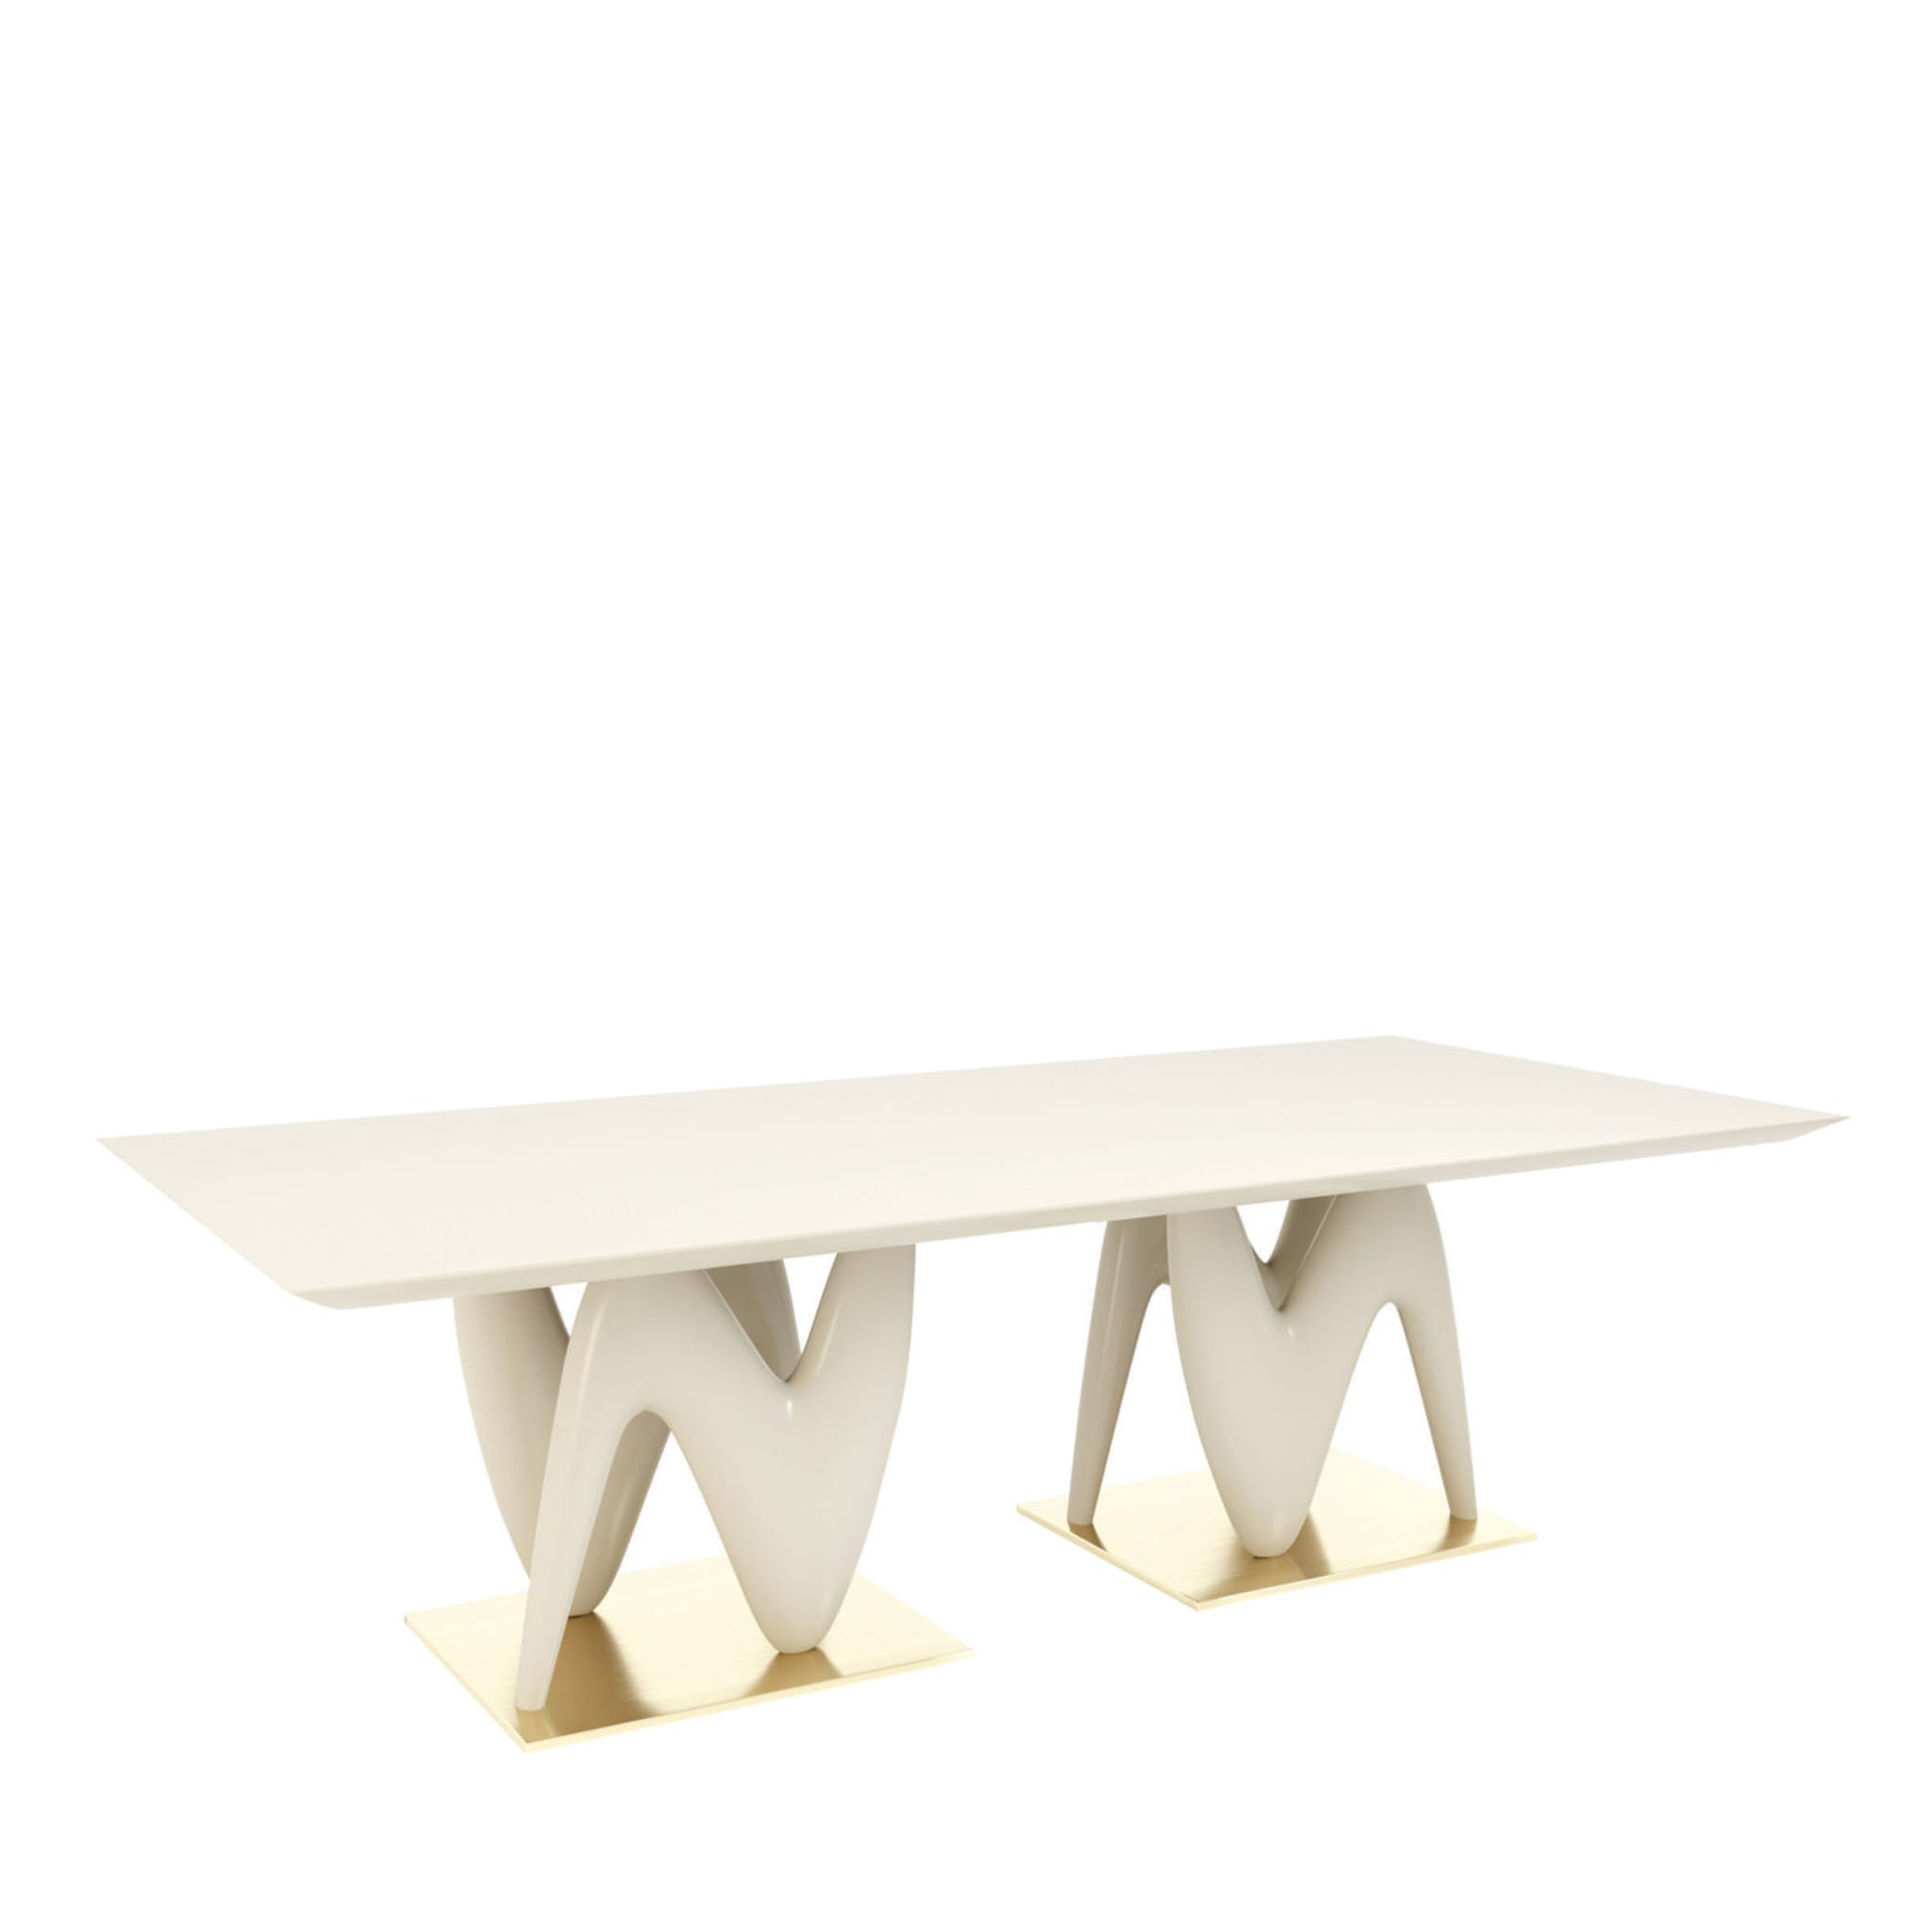 Noyack Dining Table by Giannella Ventura - Main view